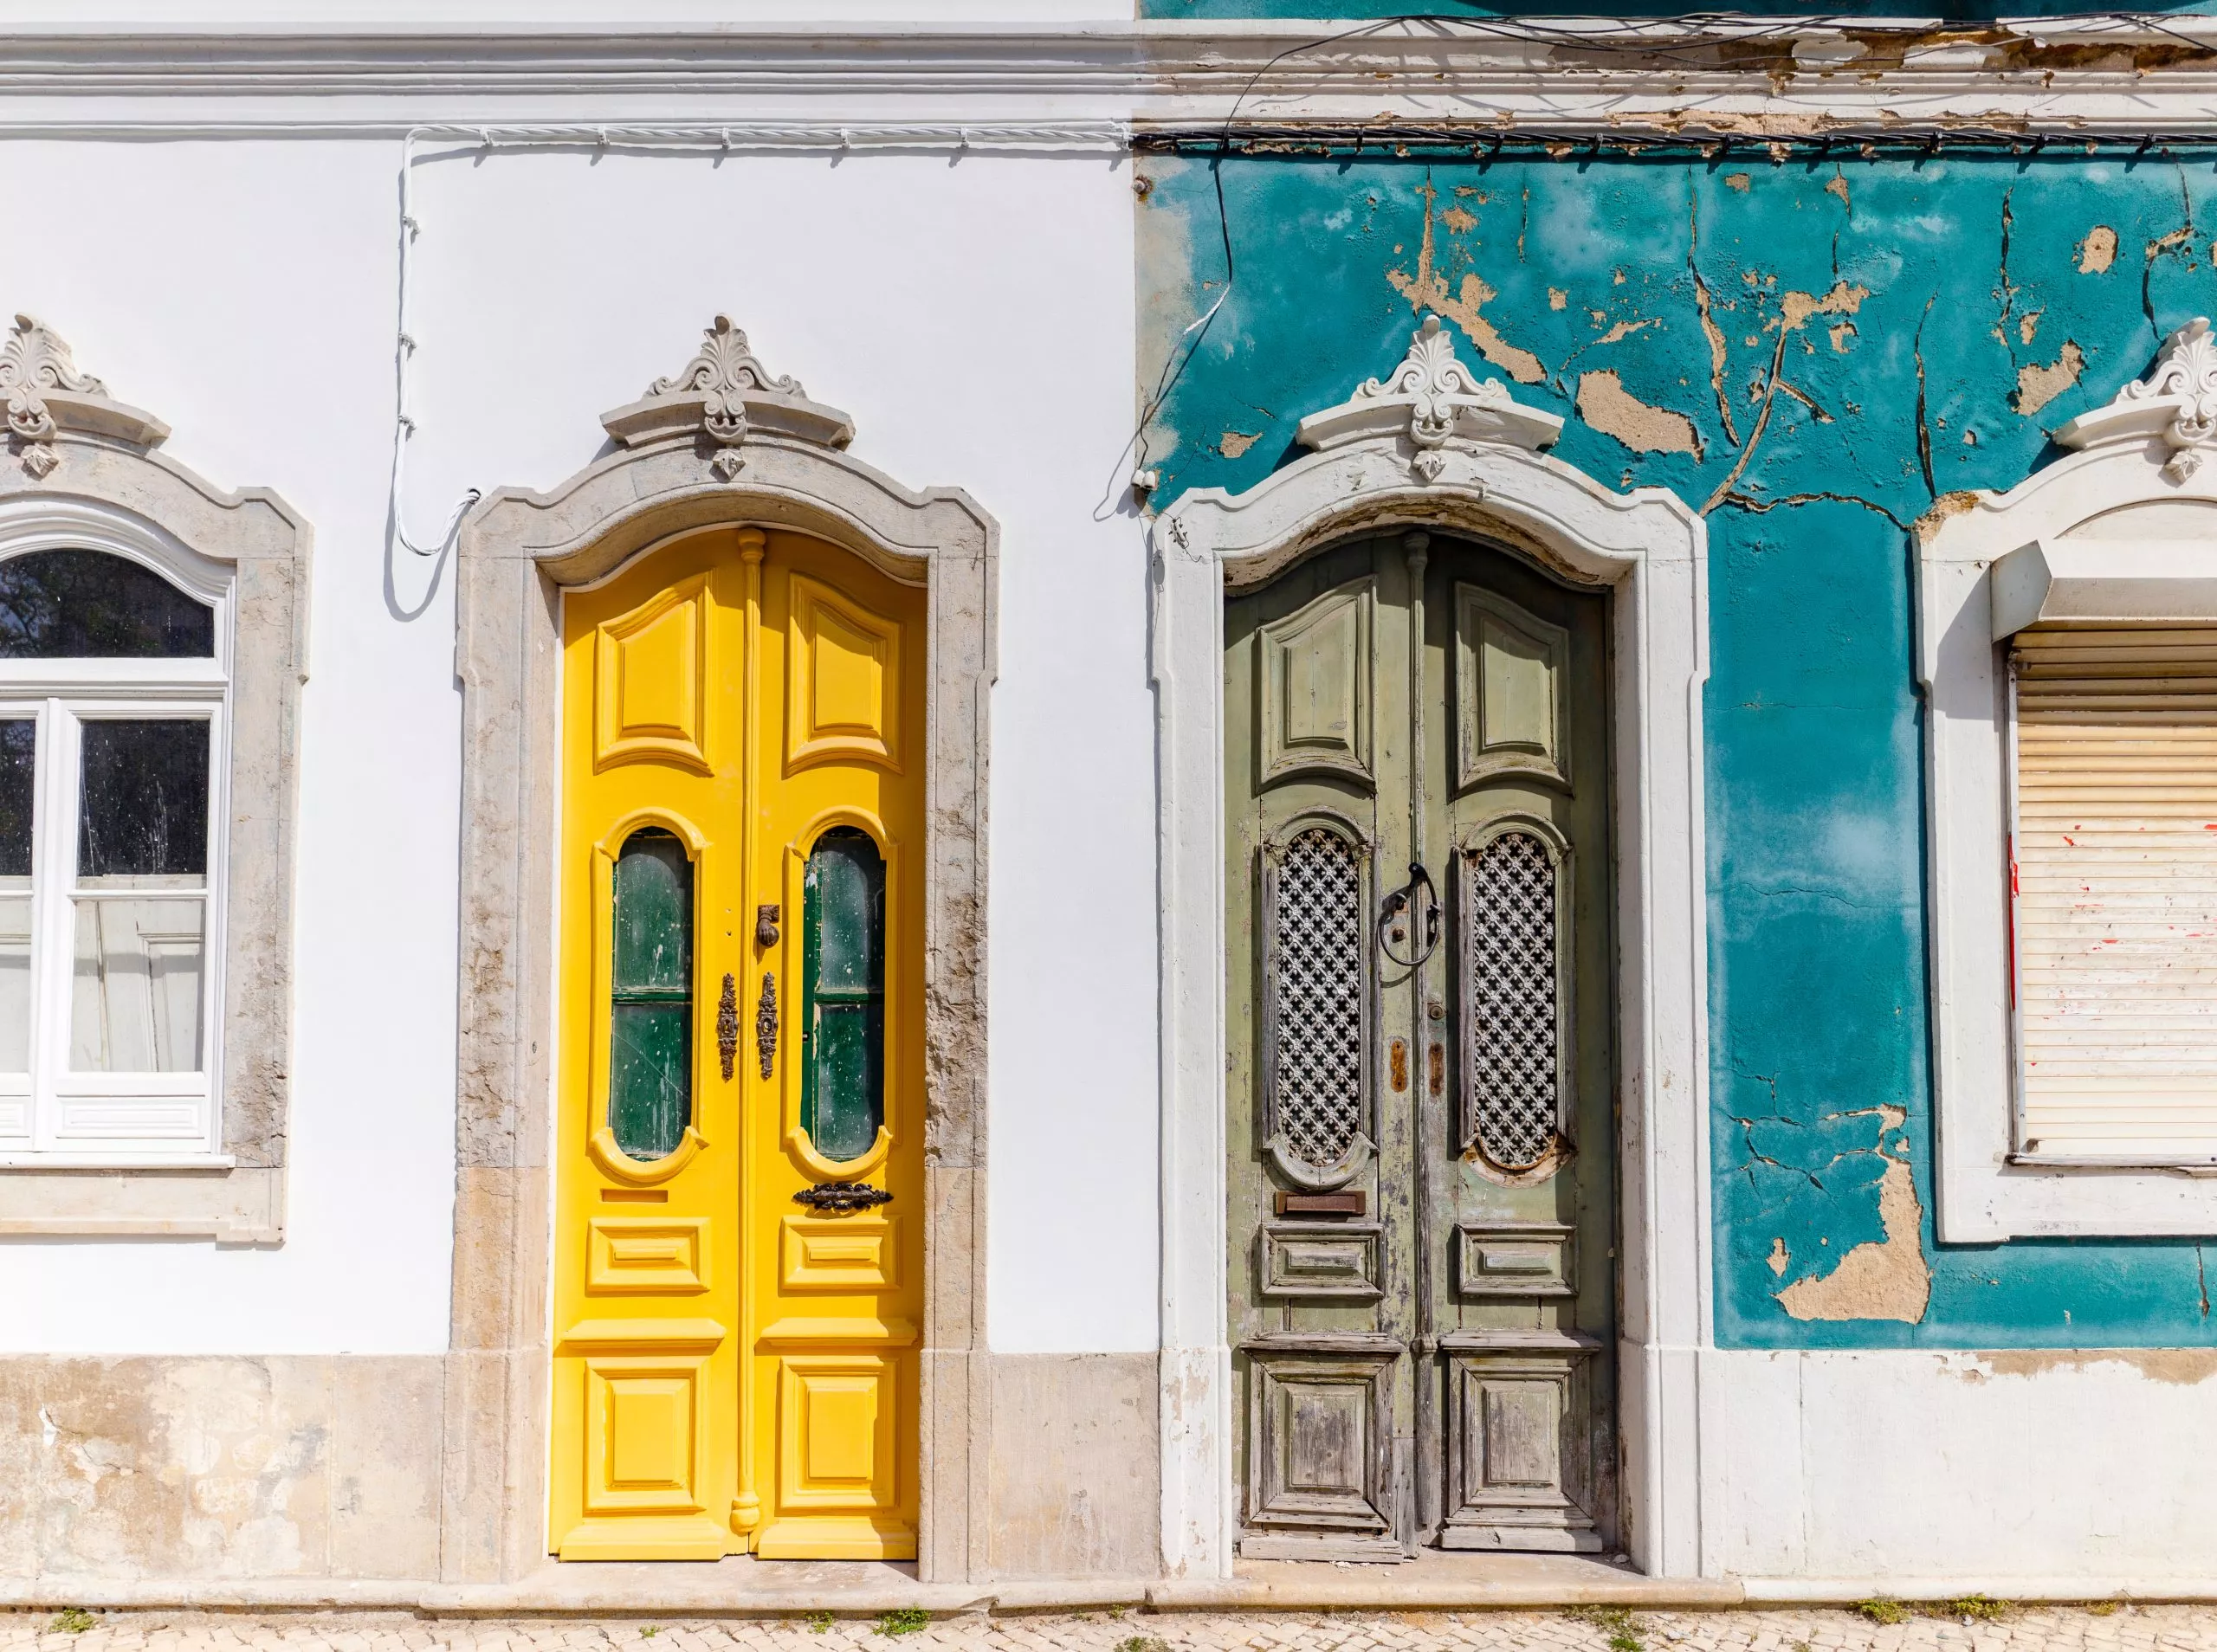 Doors to two different traditional houses in Olhao, Algarve, Portugal